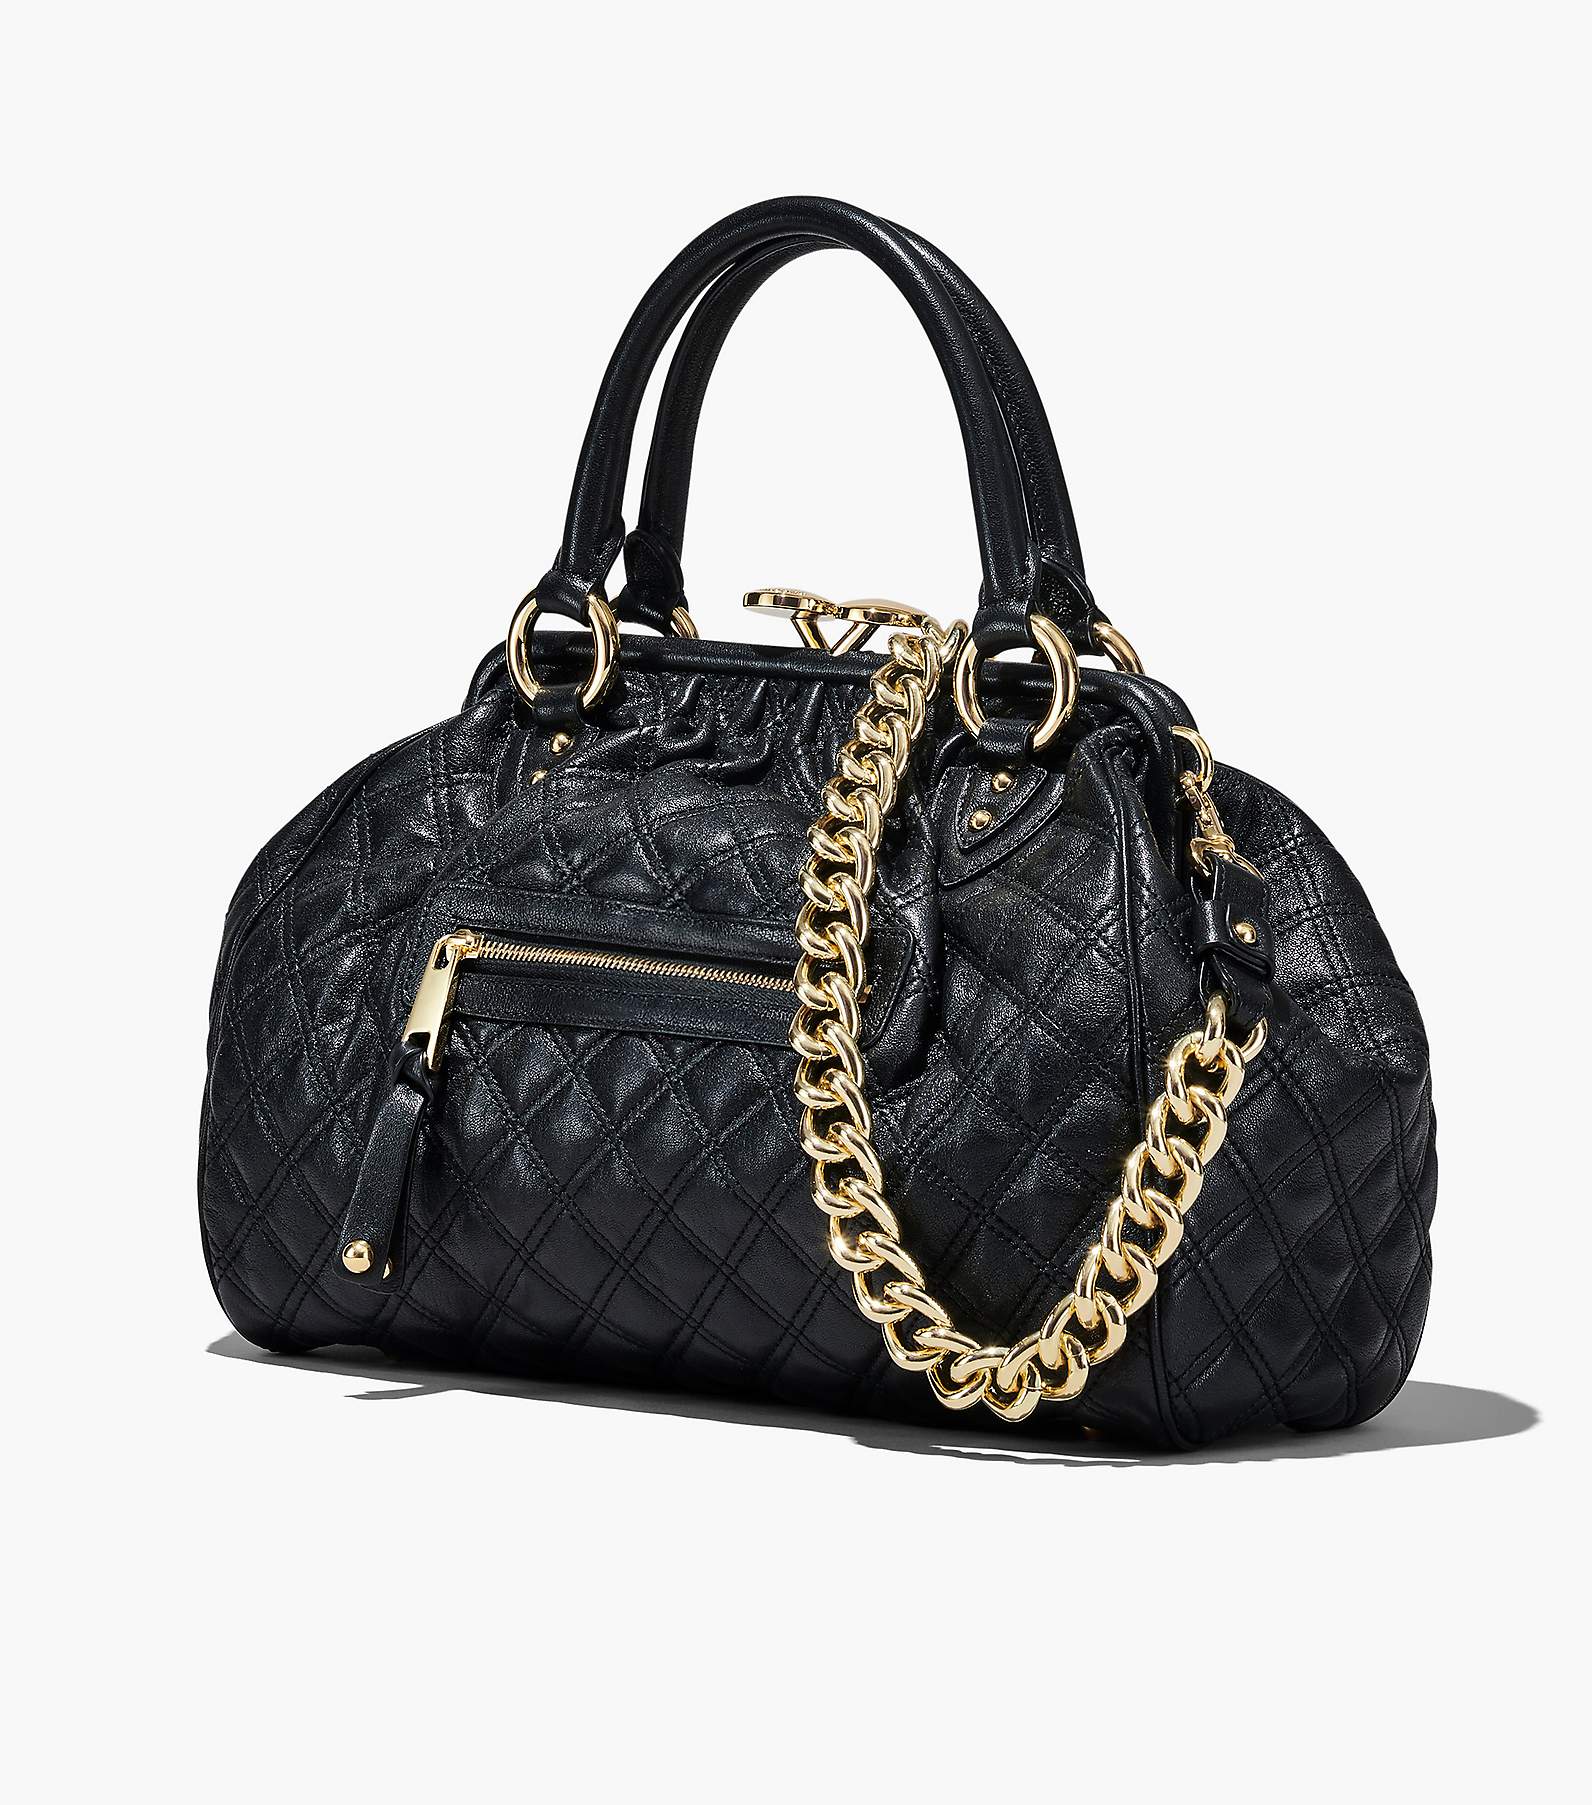 Marc Jacobs Re-Edition Quilted Leather Stam Bag